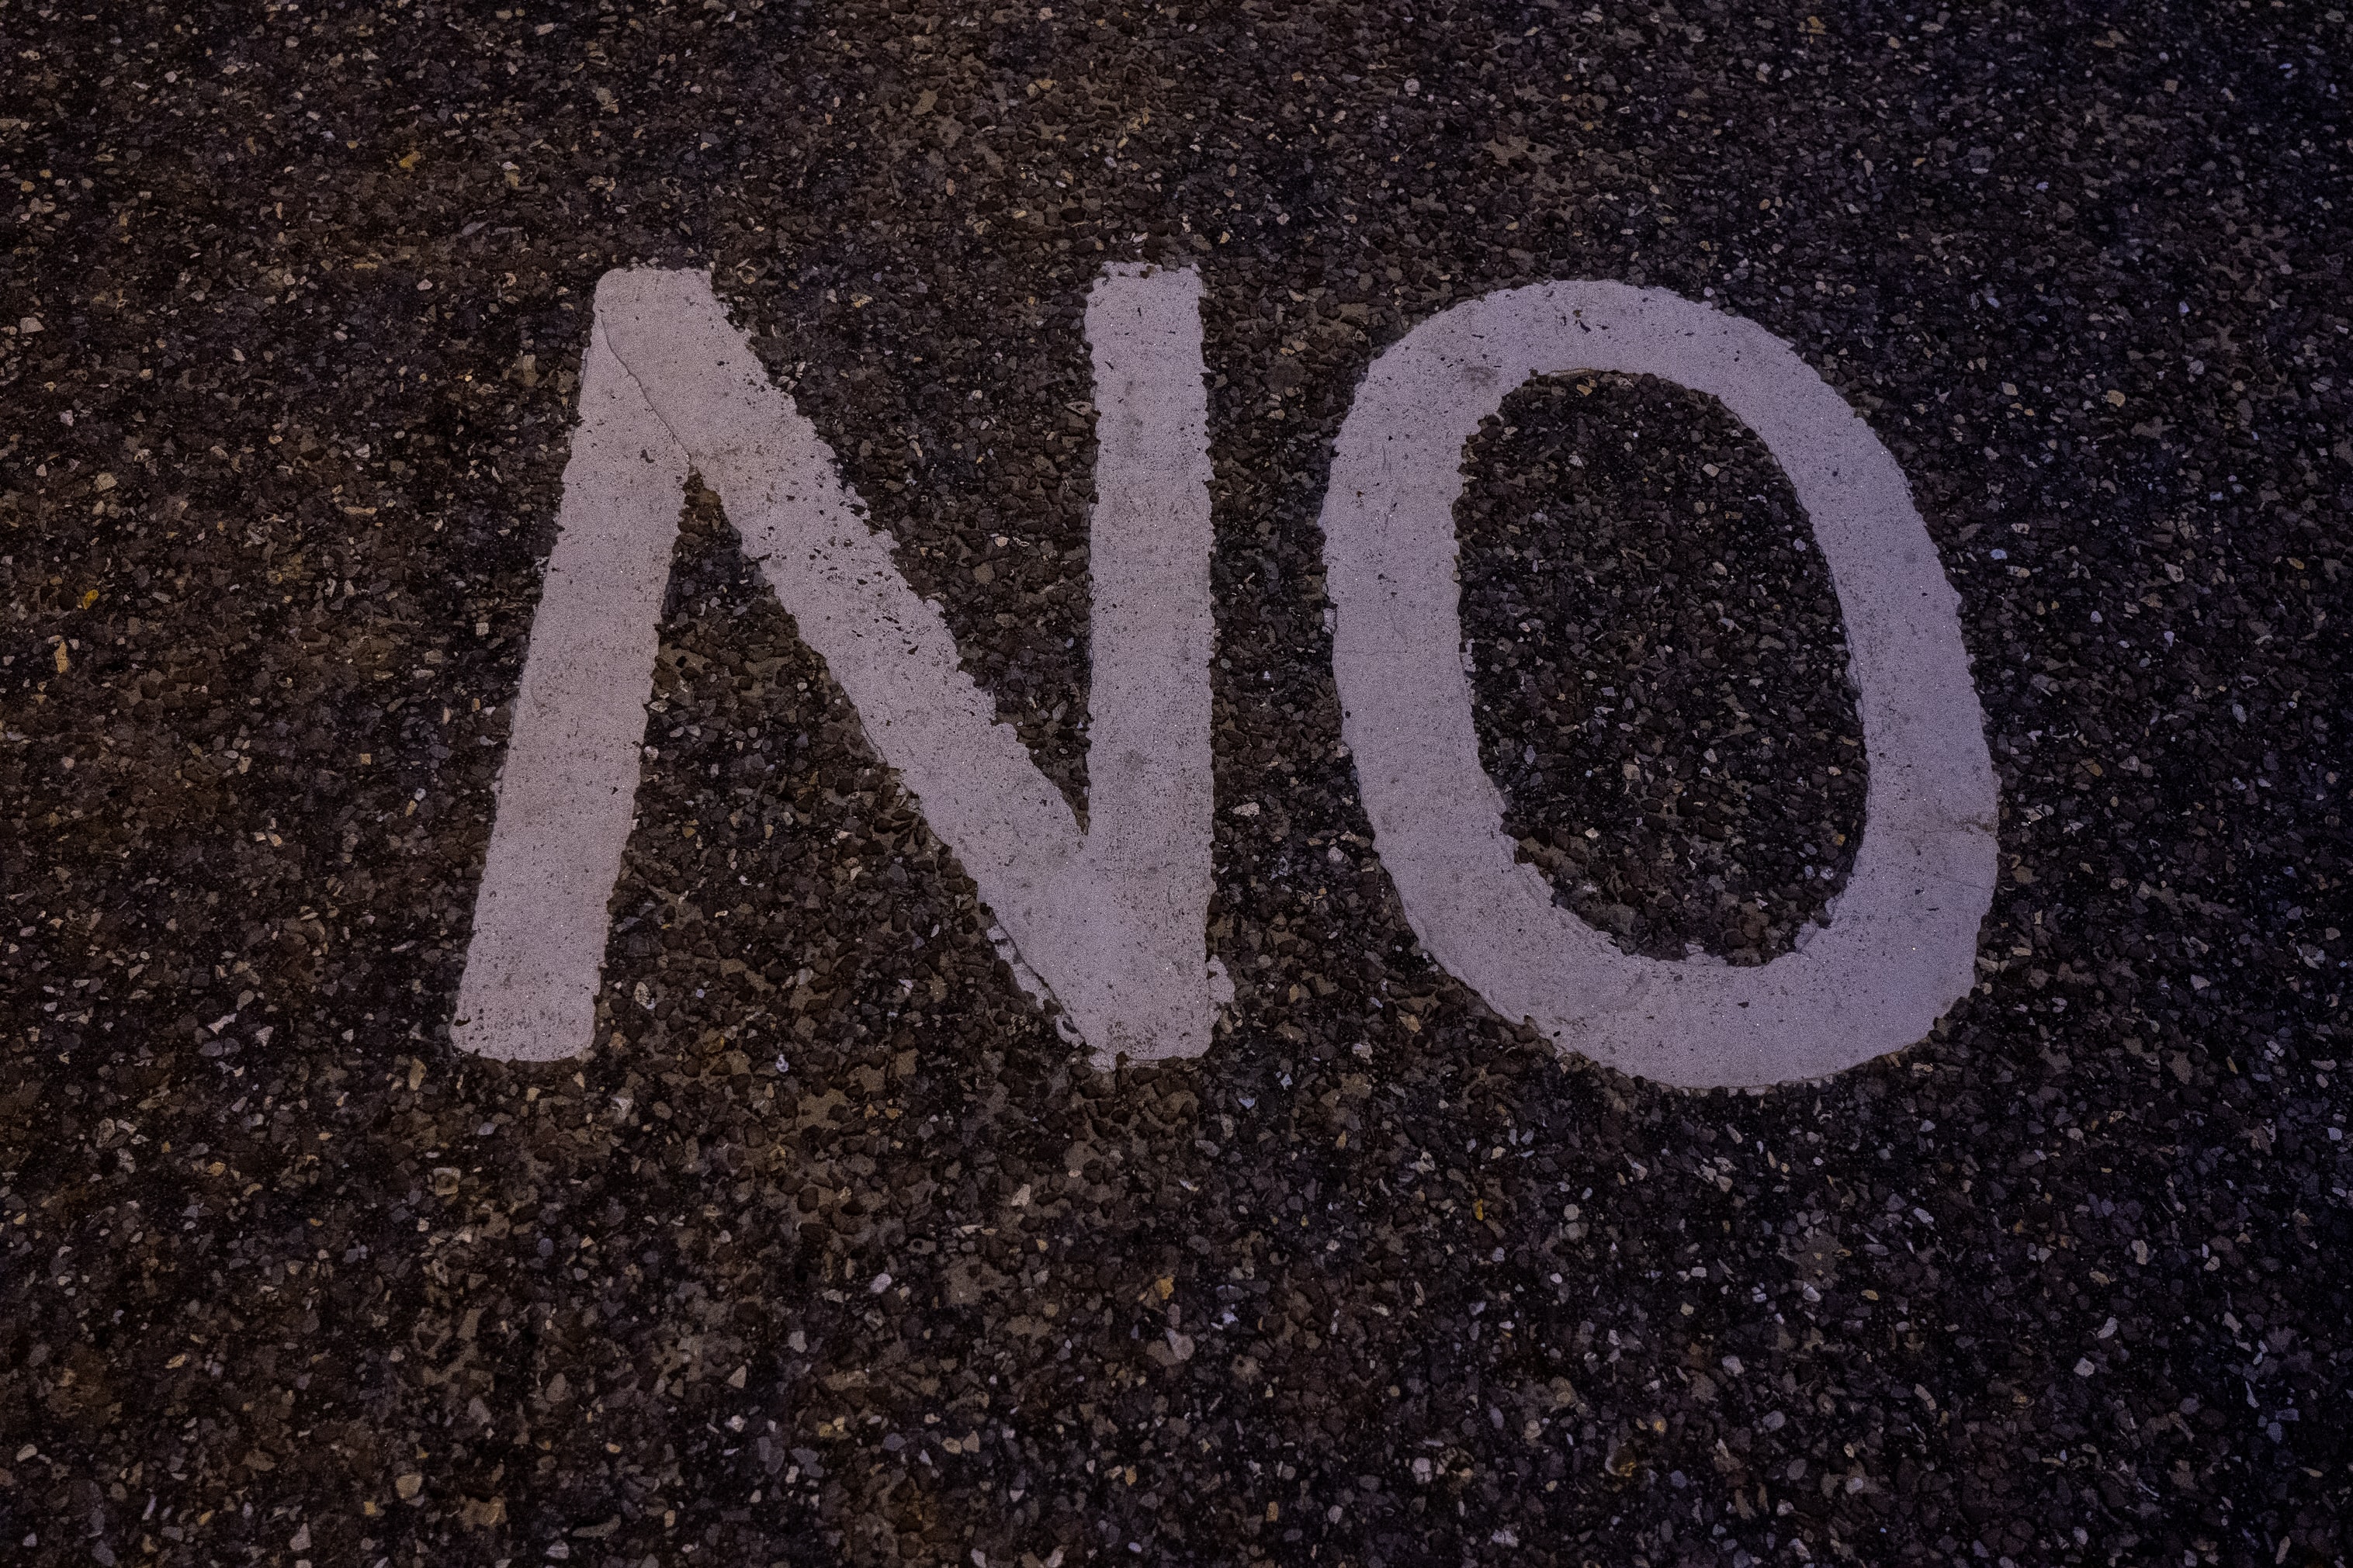 The word 'no' painted on a tar road